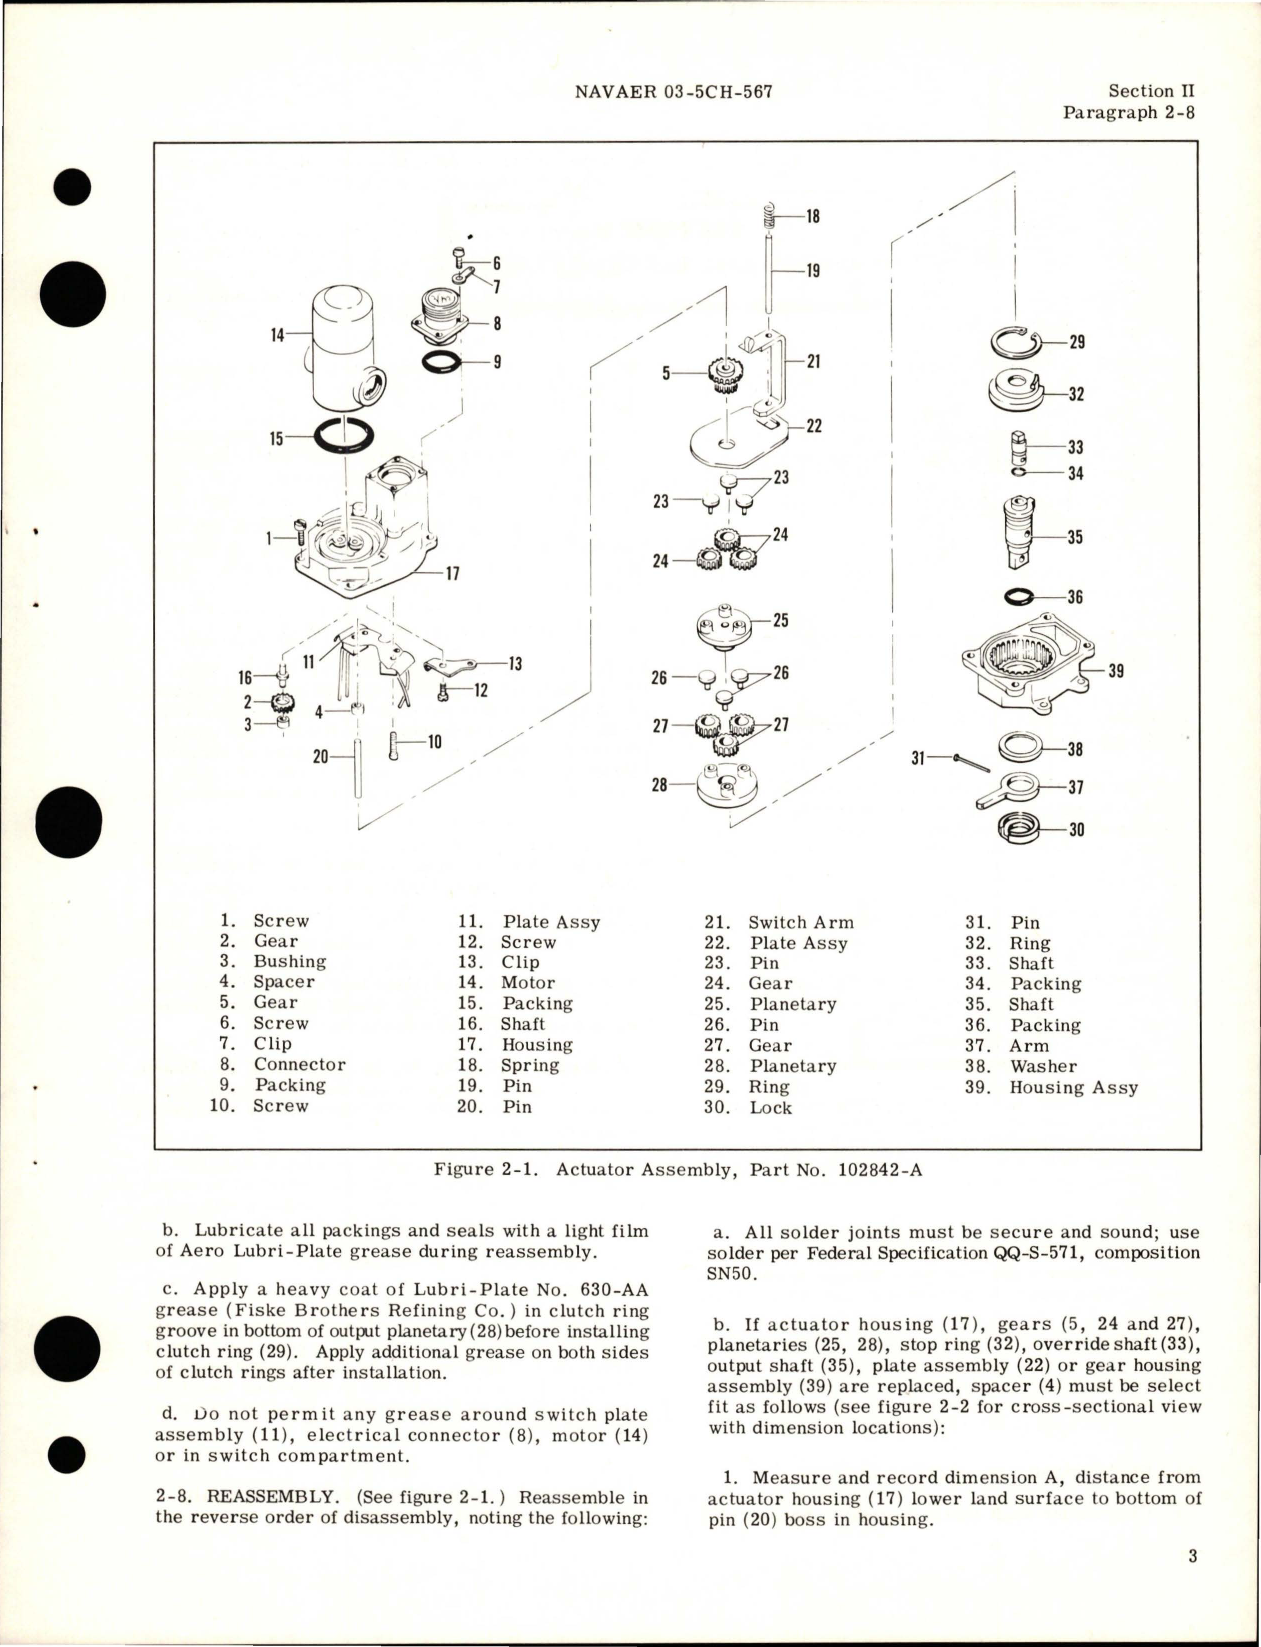 Sample page 7 from AirCorps Library document: Overhaul Instructions for Actuator Assembly - Part 102842-A and Similar Parts